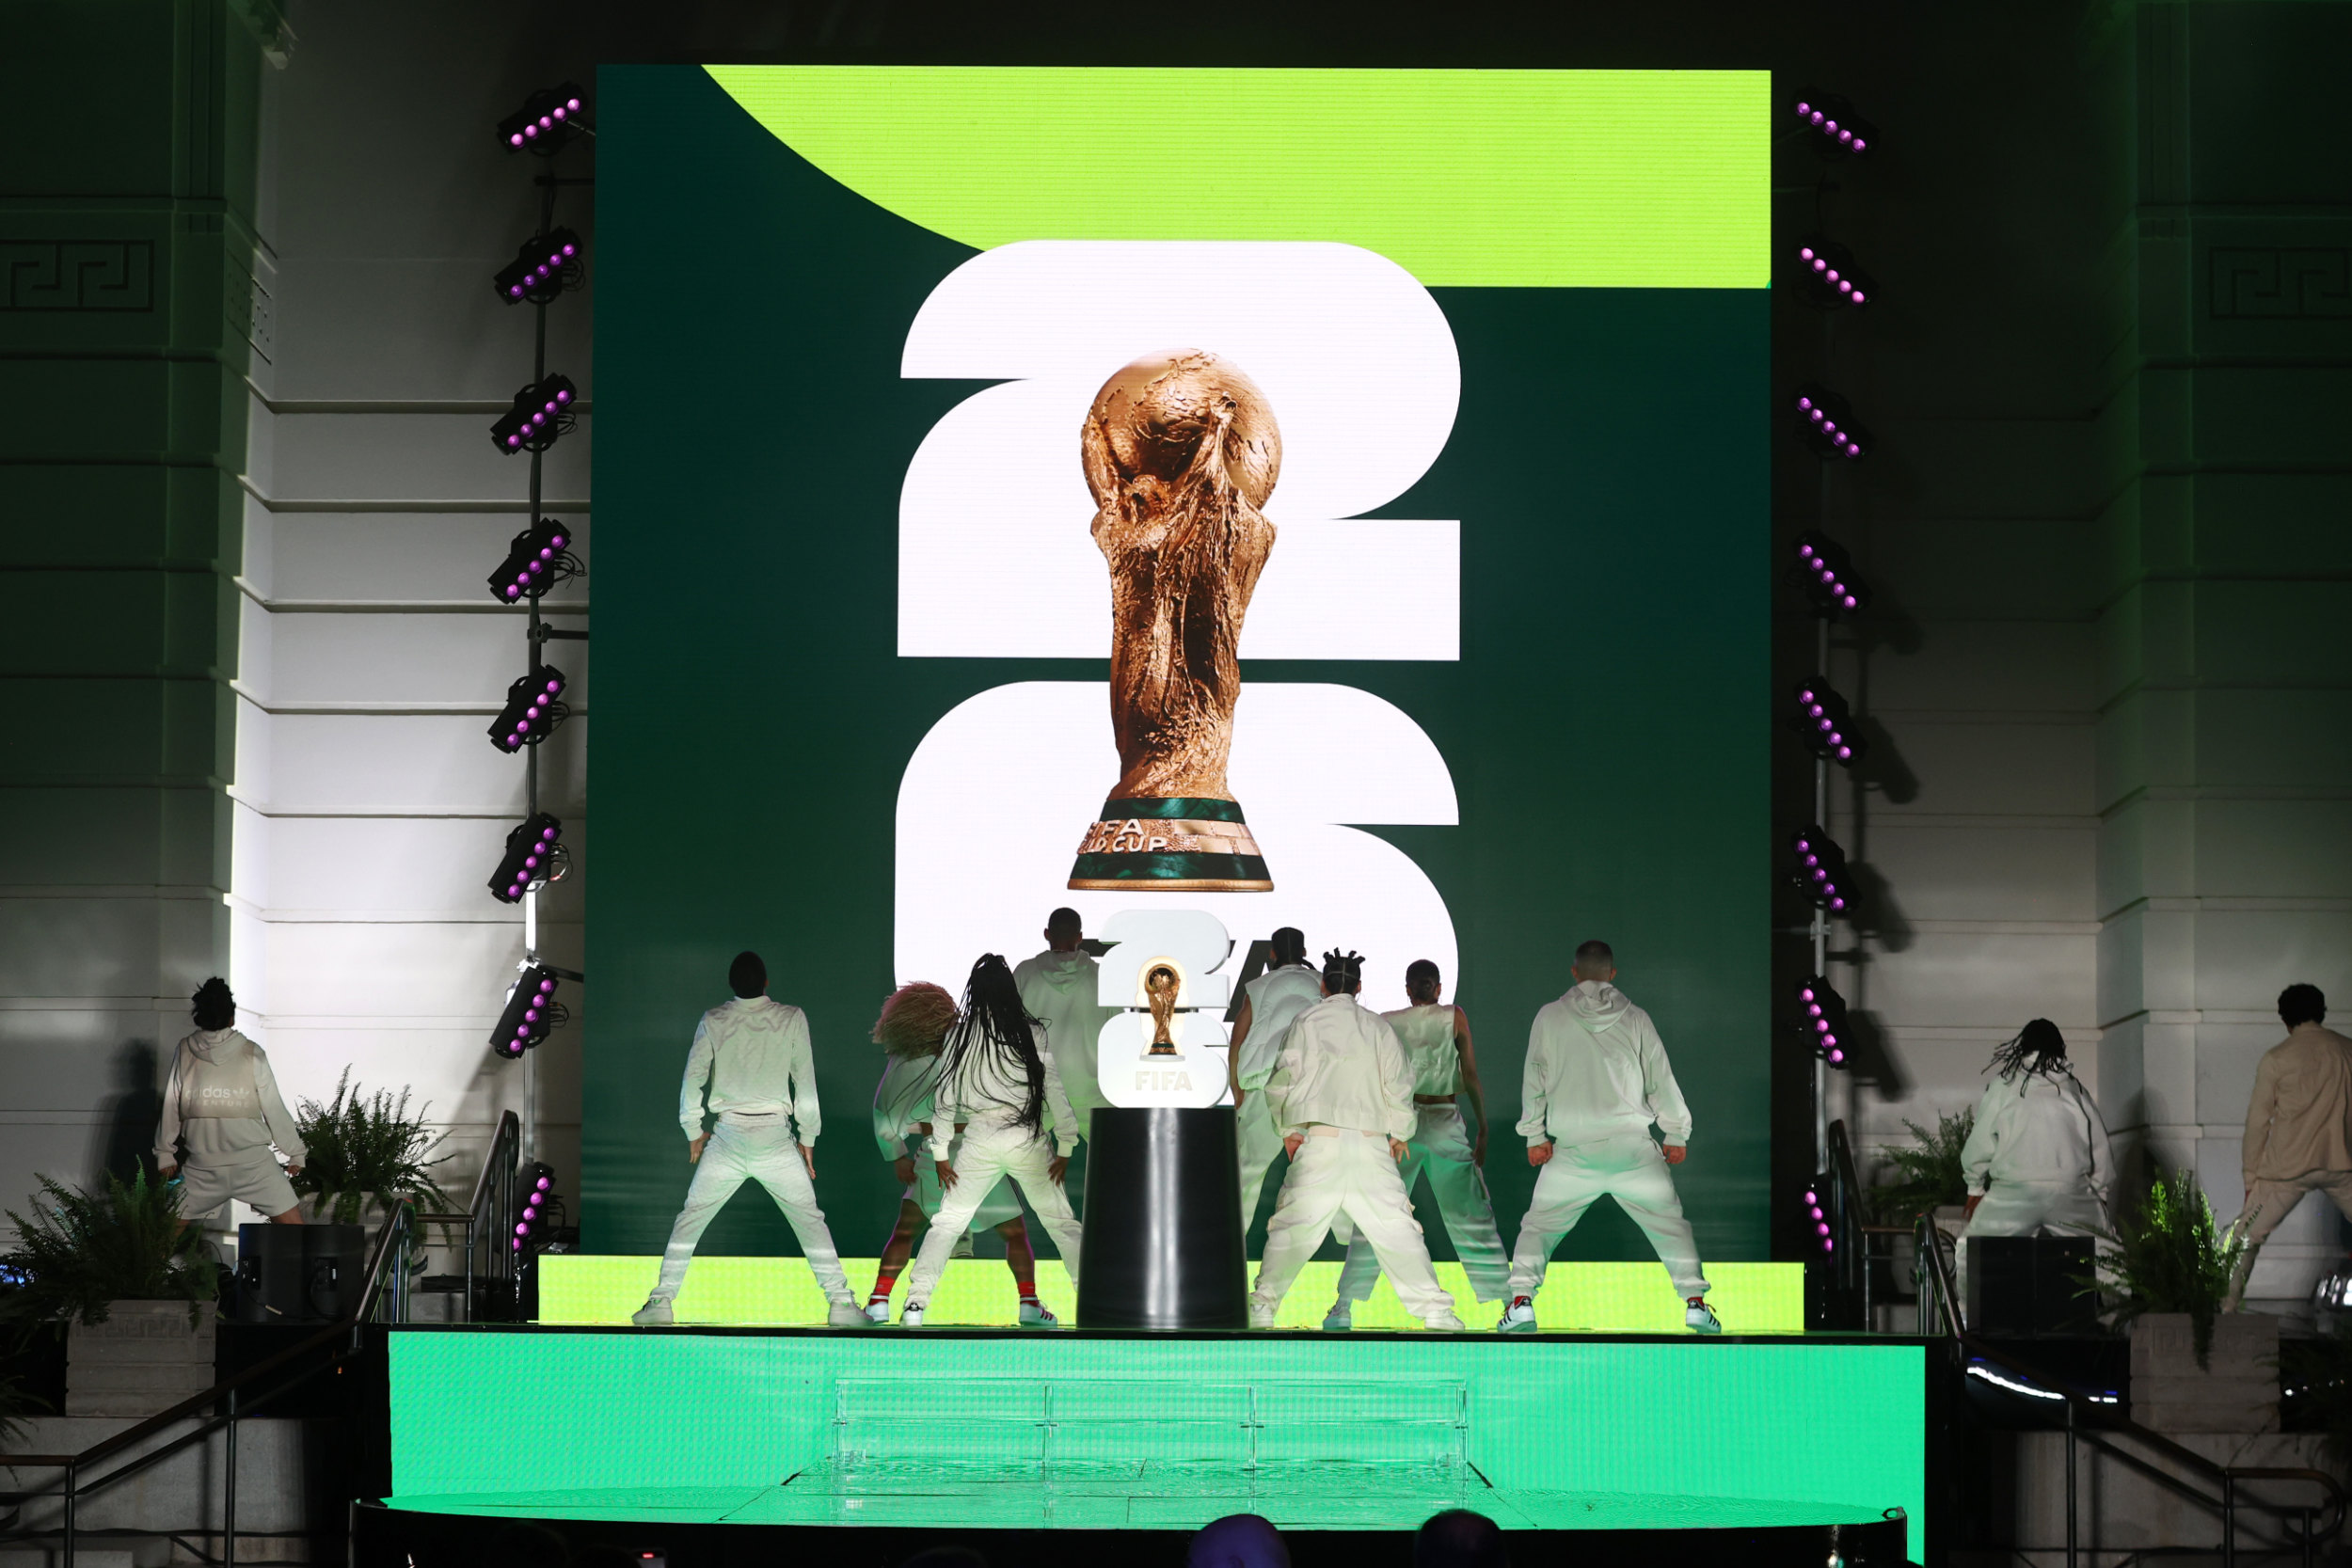 LOS ANGELES, CALIFORNIA - MAY 17: Dancers onstage during the FIFA World Cup 2026™? Official Brand Launch at the Griffith Observatory on May 17, 2023 in Los Angeles, California. (Photo by Joe Scarnici - FIFA/FIFA via Getty Images), Quelle: FIFA